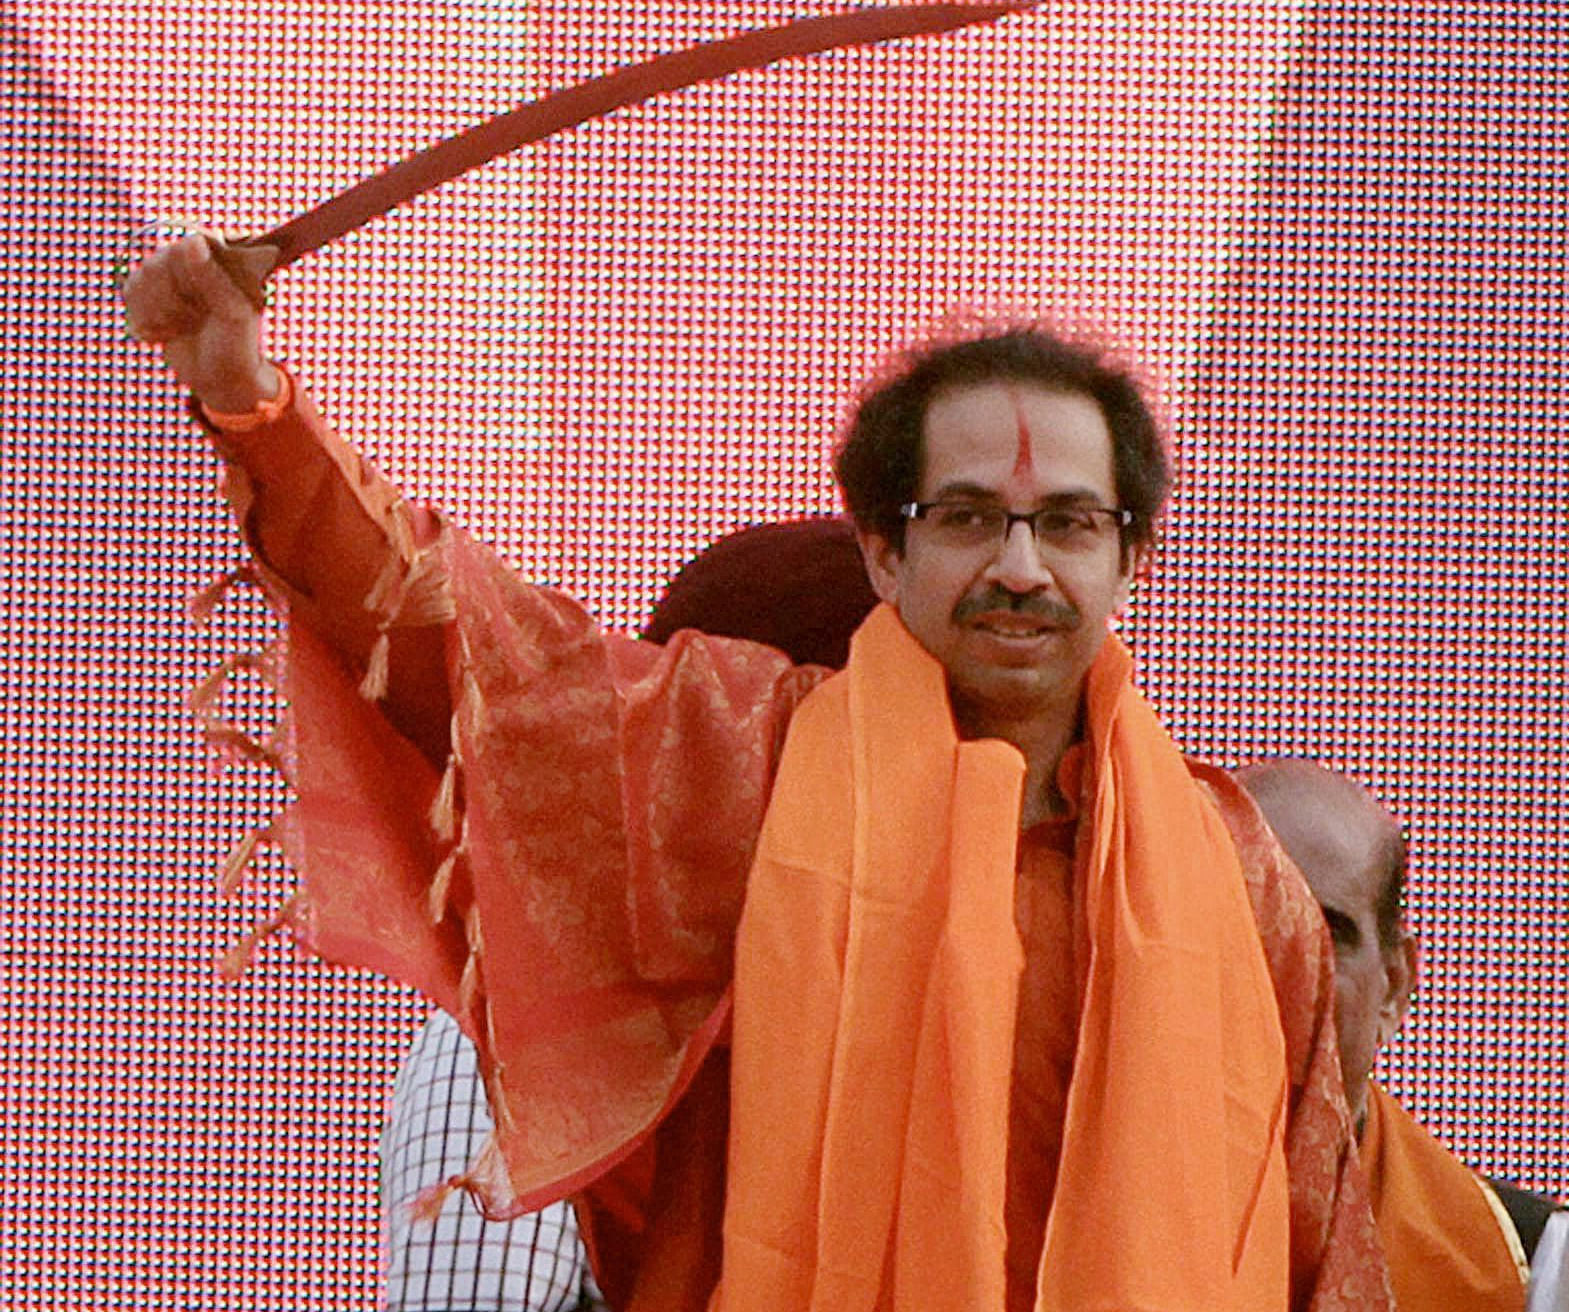 During the Assembly poll campaign, Sena chief Uddhav Thackeray had made a reference to Afzal Khan, the general of Bijapur's Adil Shahi dynasty, and his army's assault on Shivaji's dominion, to hit out at BJP after the two parties parted ways. PTI file photo